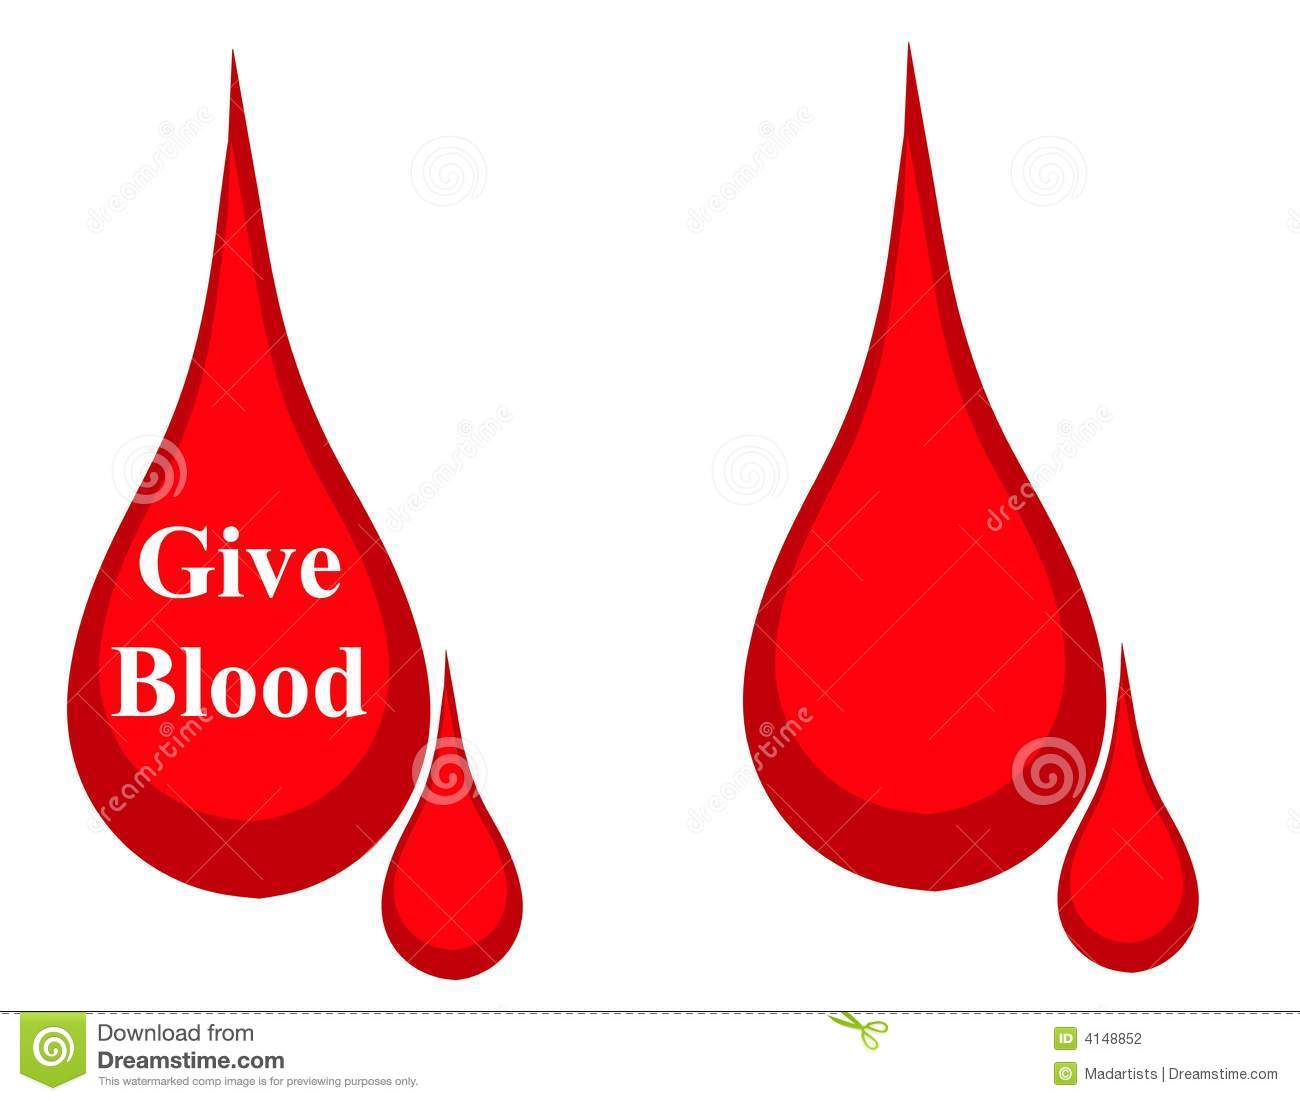     Drop Of Blood   One With The Words  Give Blood  And The Other Blank